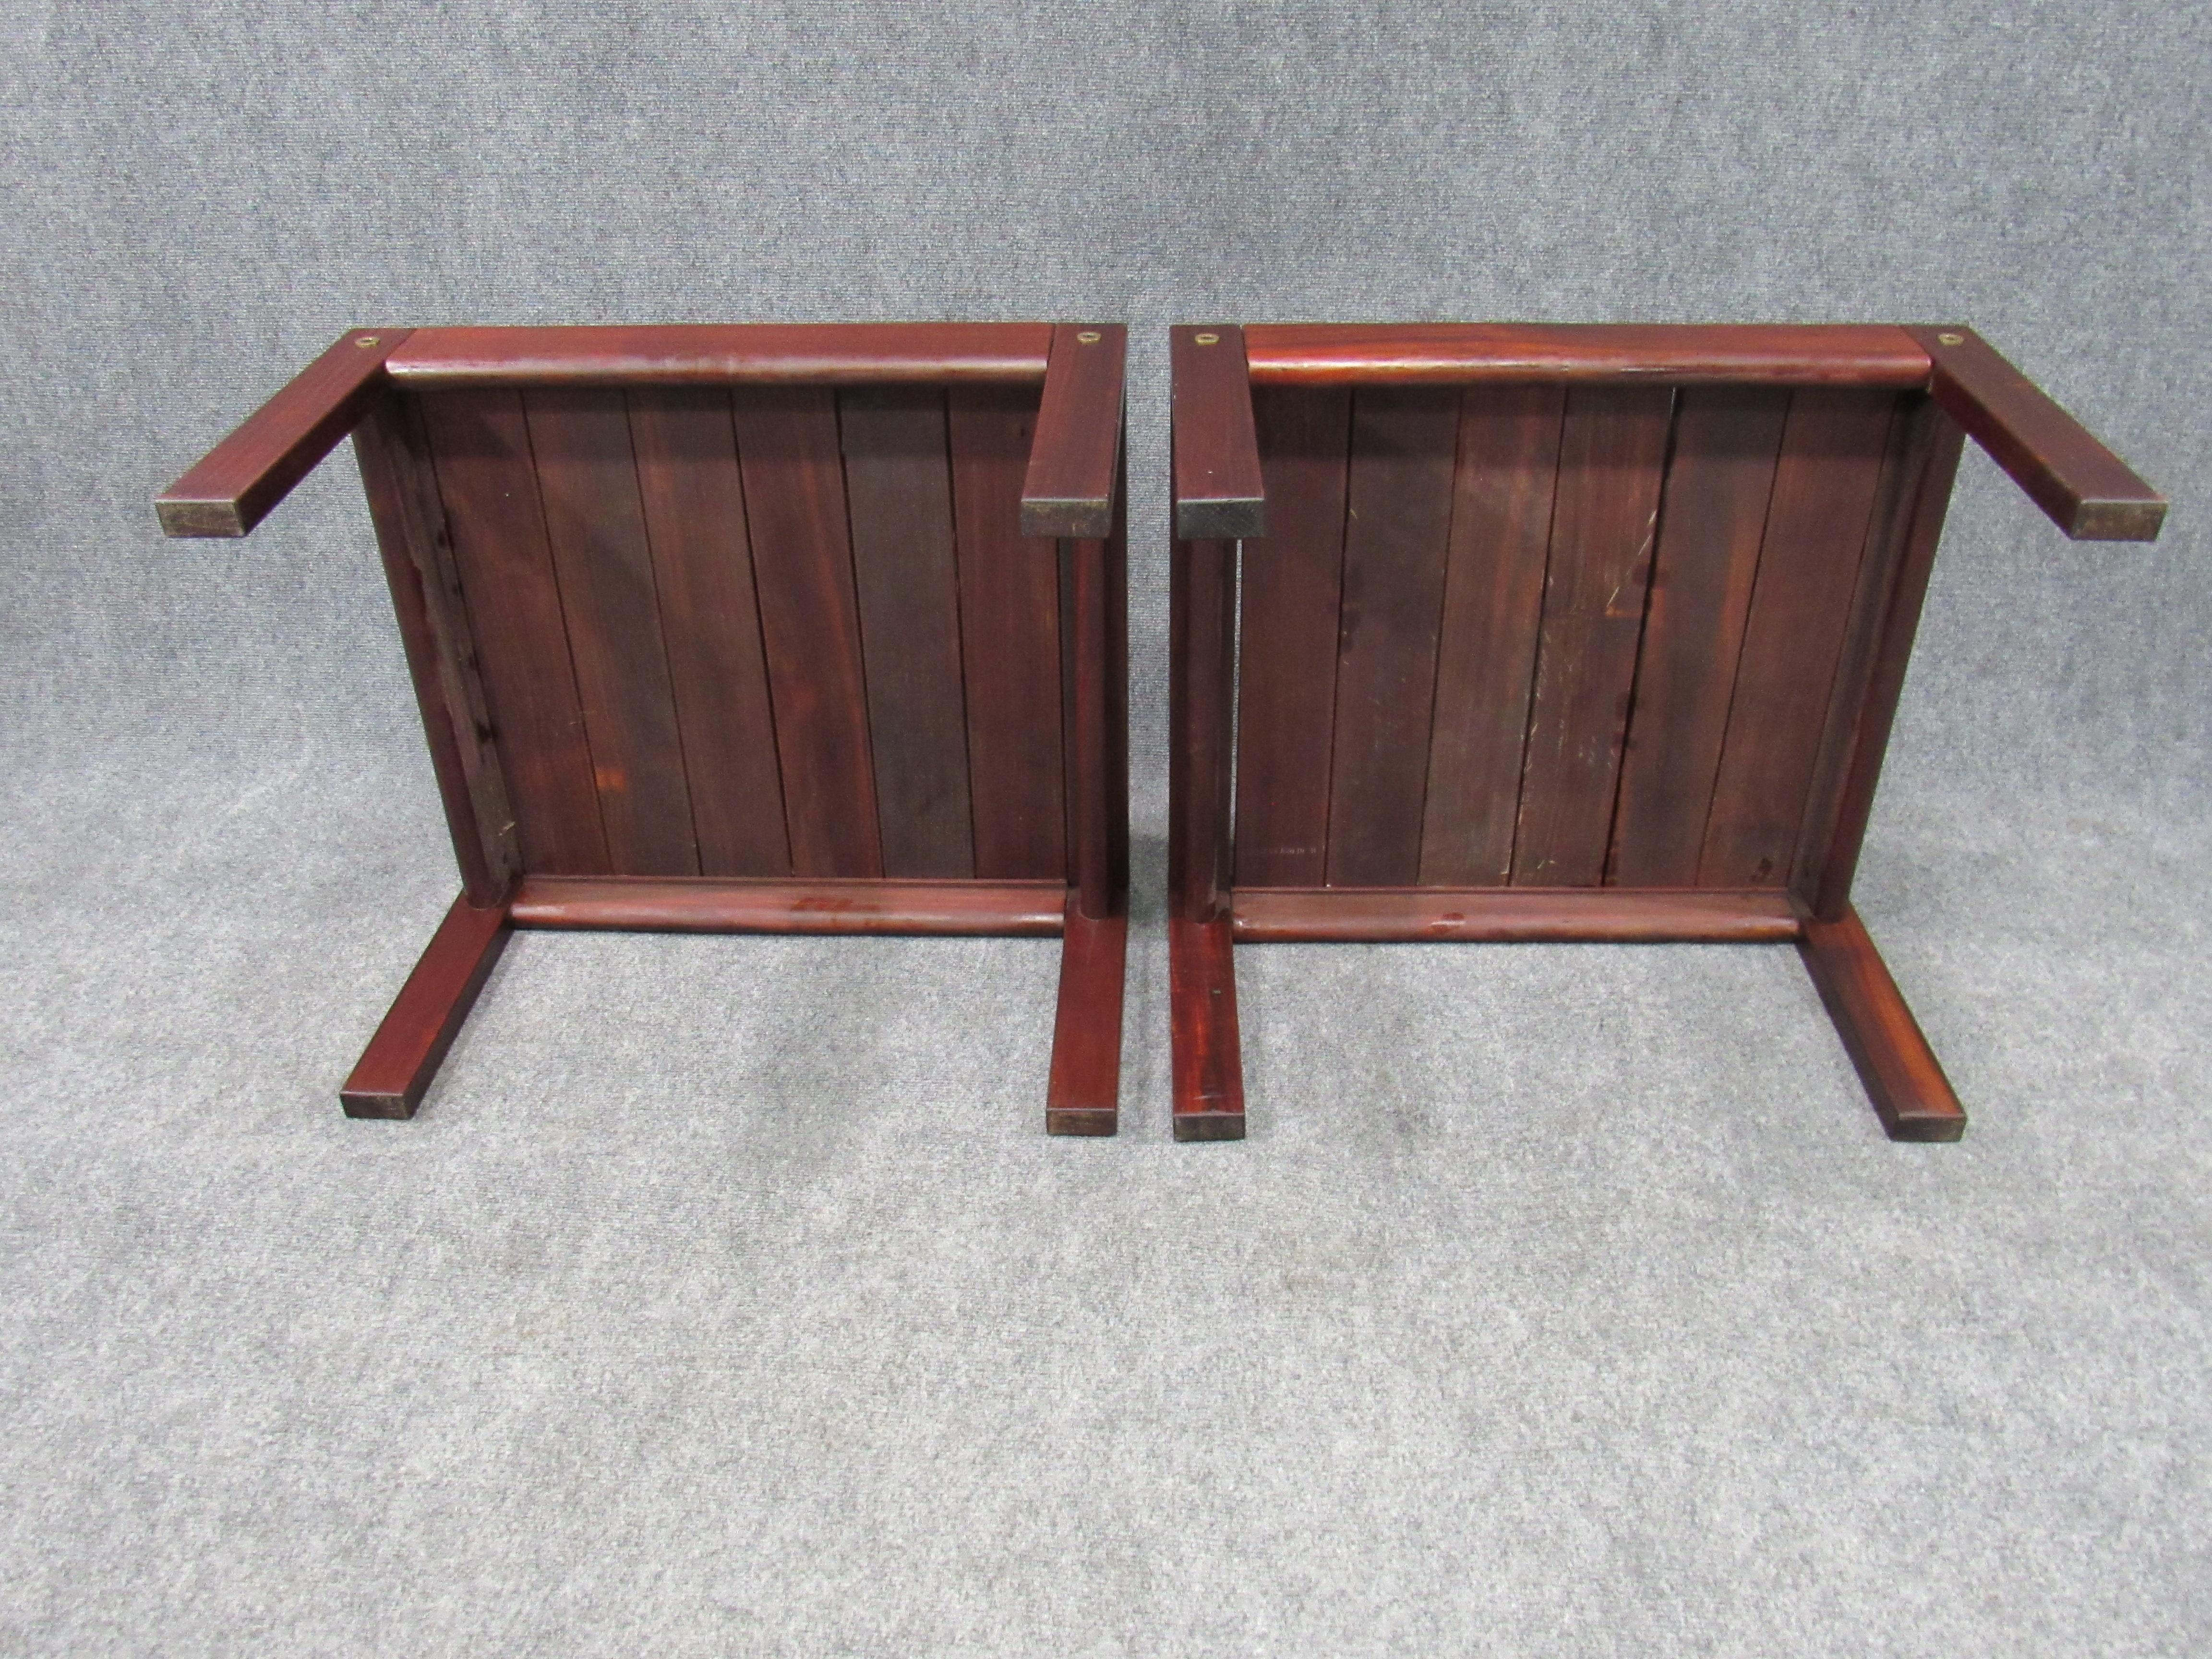 Pair of rare solid midcentury 1960s Brazilian modern Jacaranda rosewood ottomans or stools or end tables attributed to Jacaranda. The simple yet elegant design is similar in style to pieces designed by other prominent midcentury designers from